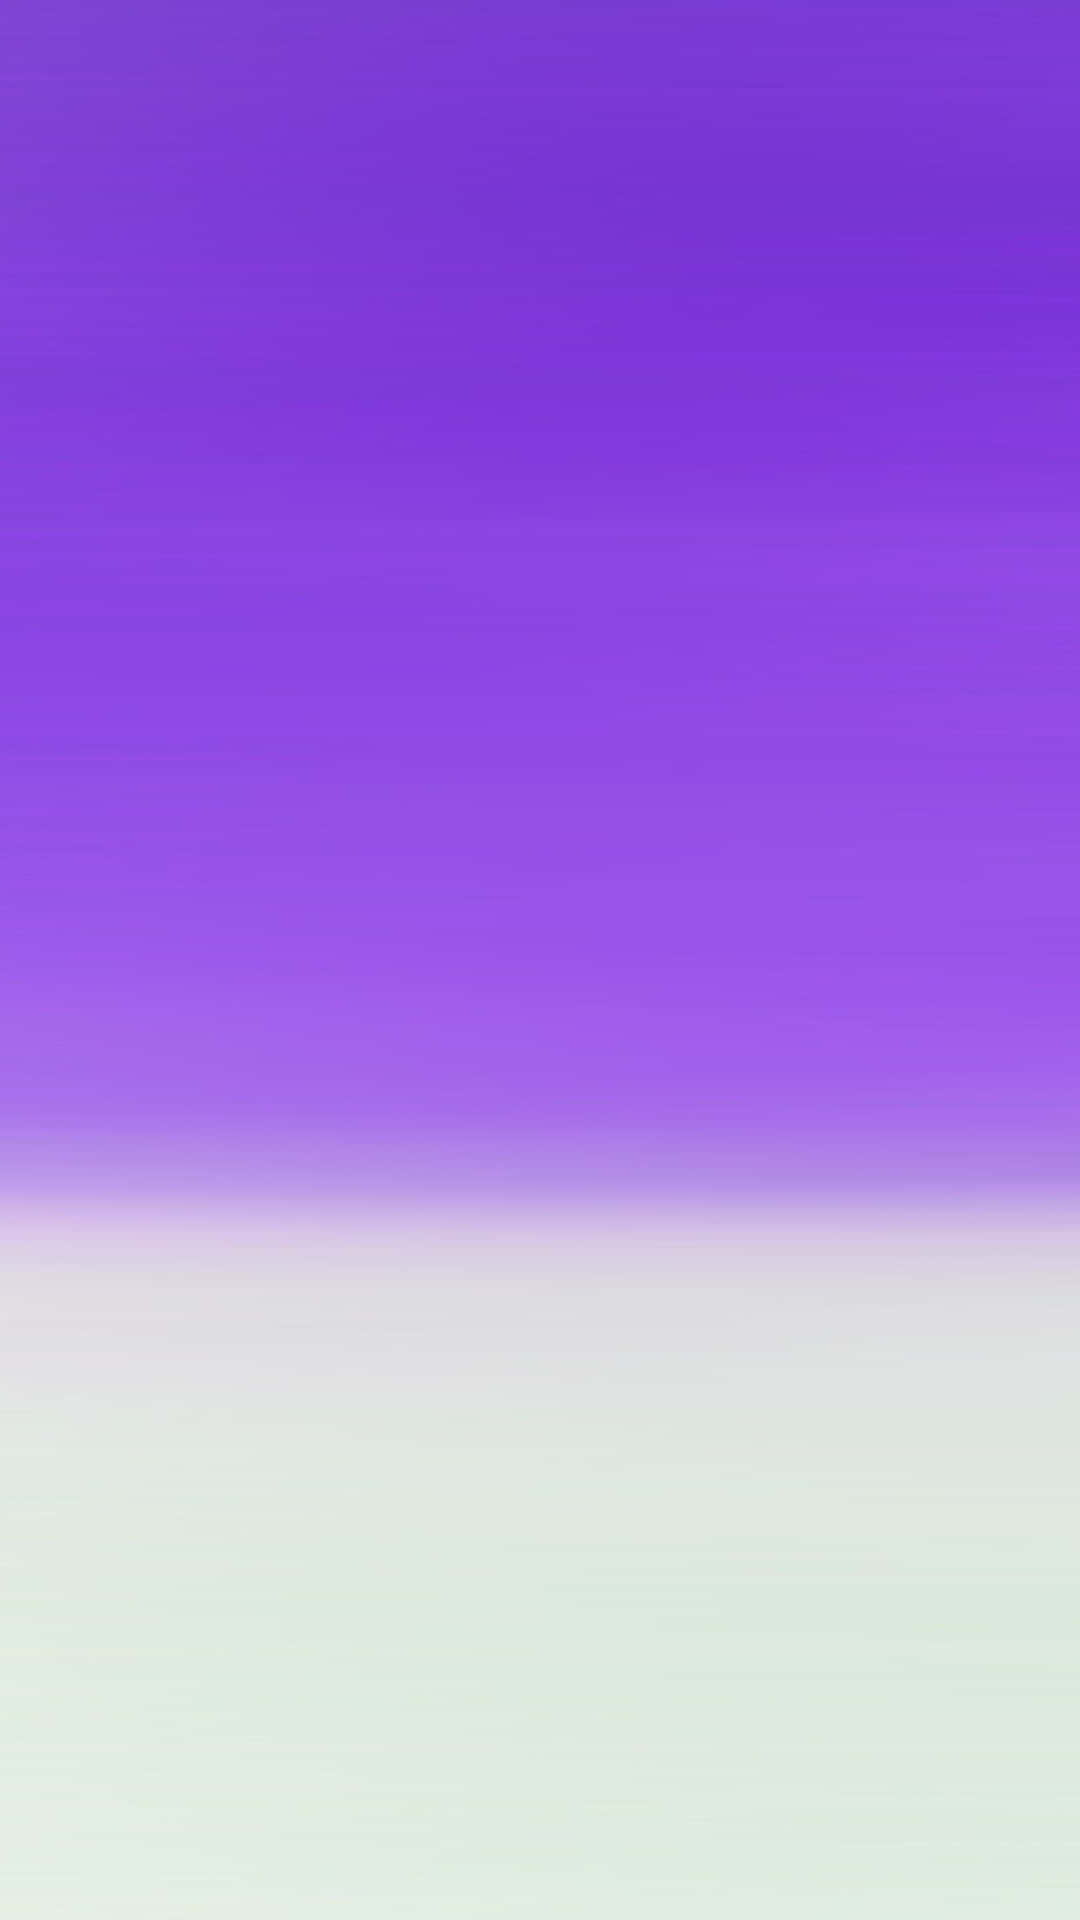 A Bright White and Purple Abstract Wallpaper